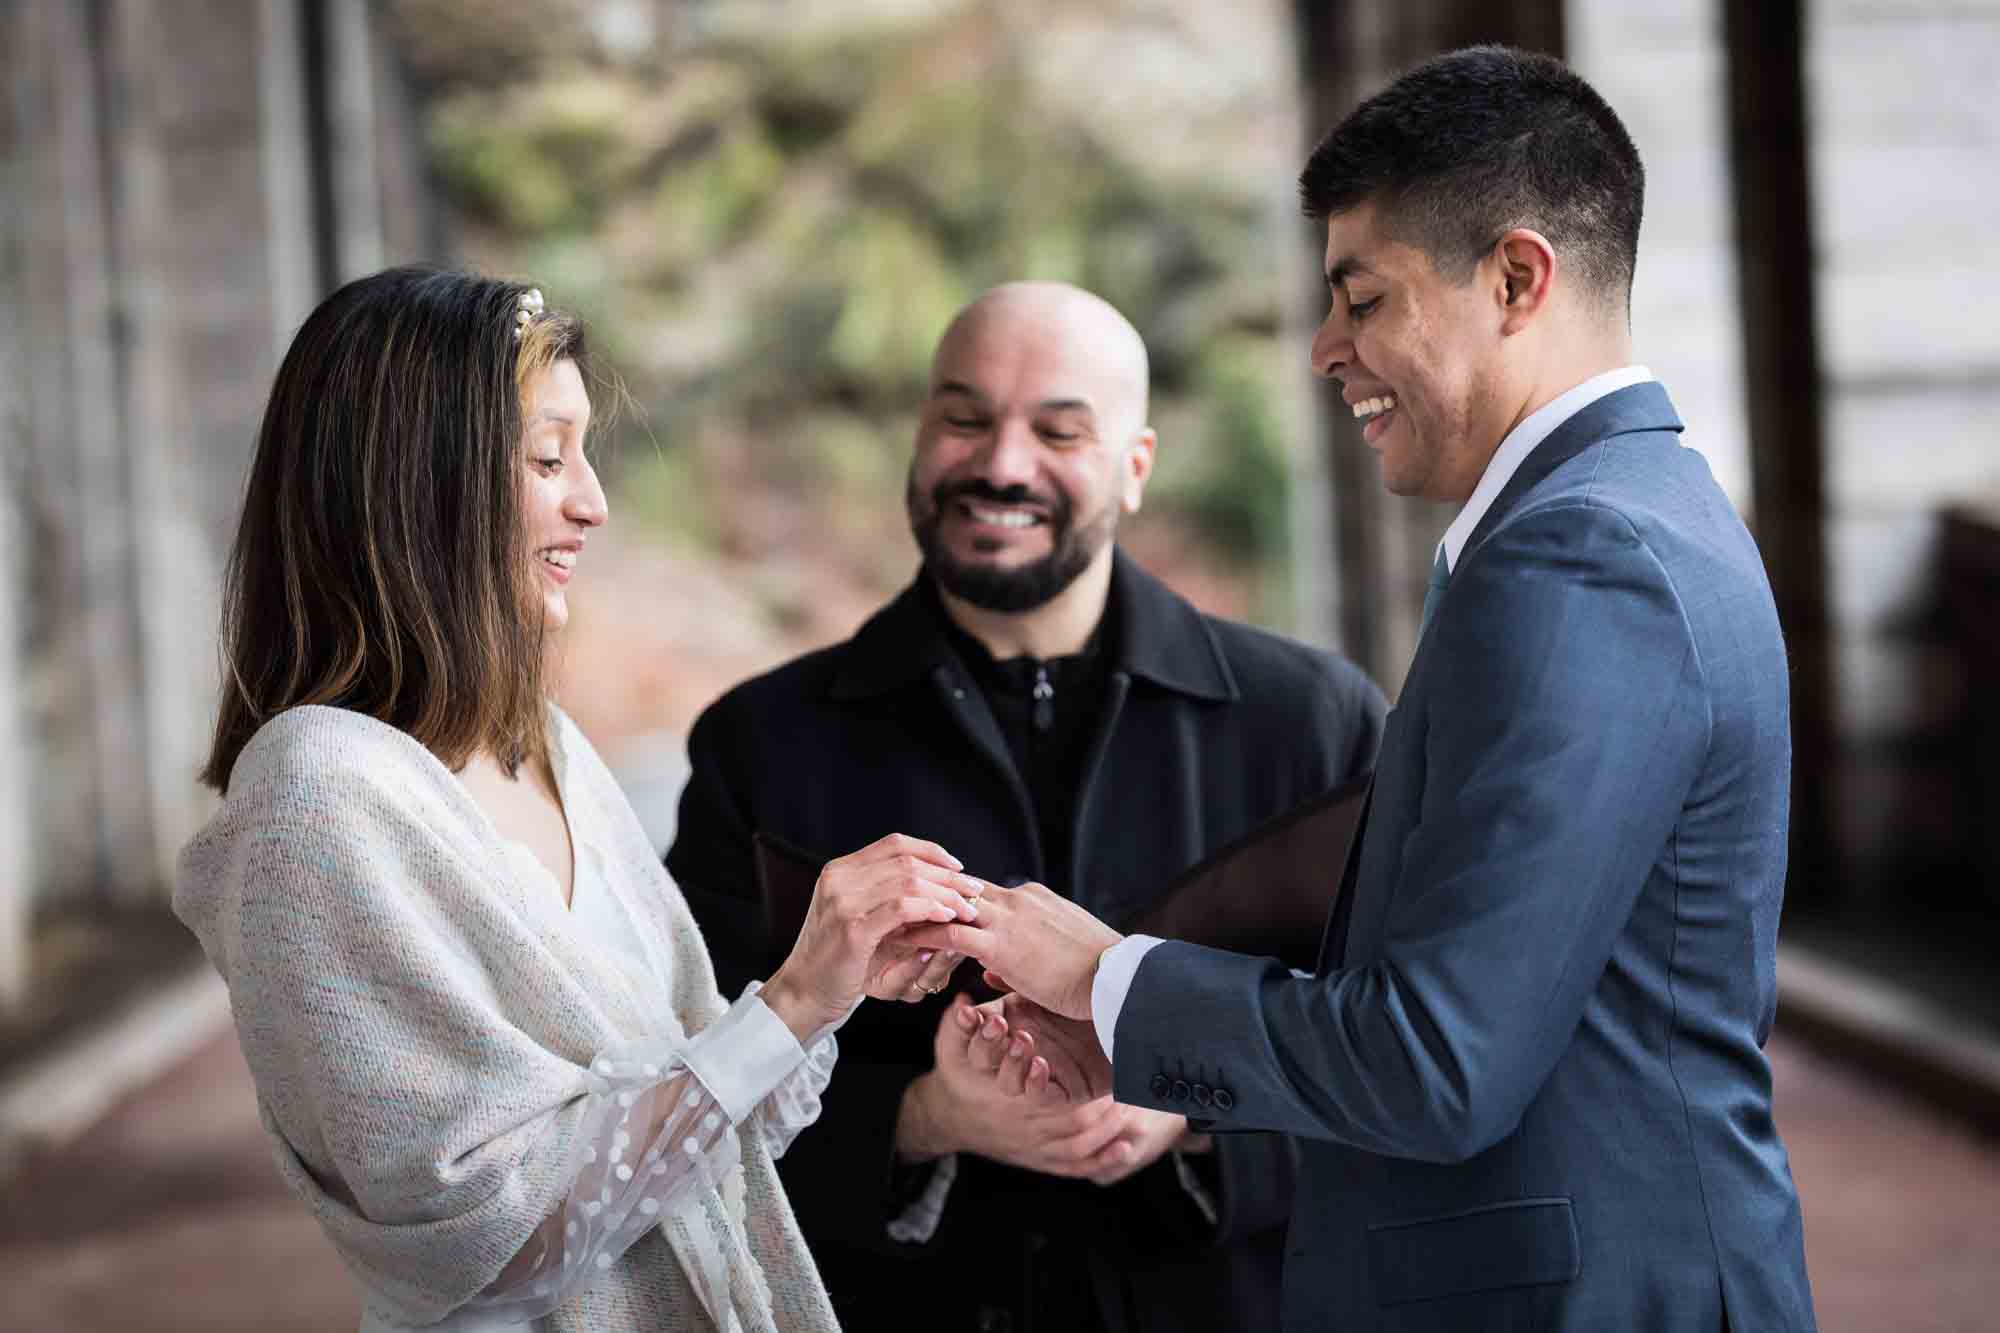 Bride putting wedding ring on groom's finger in front of officiant